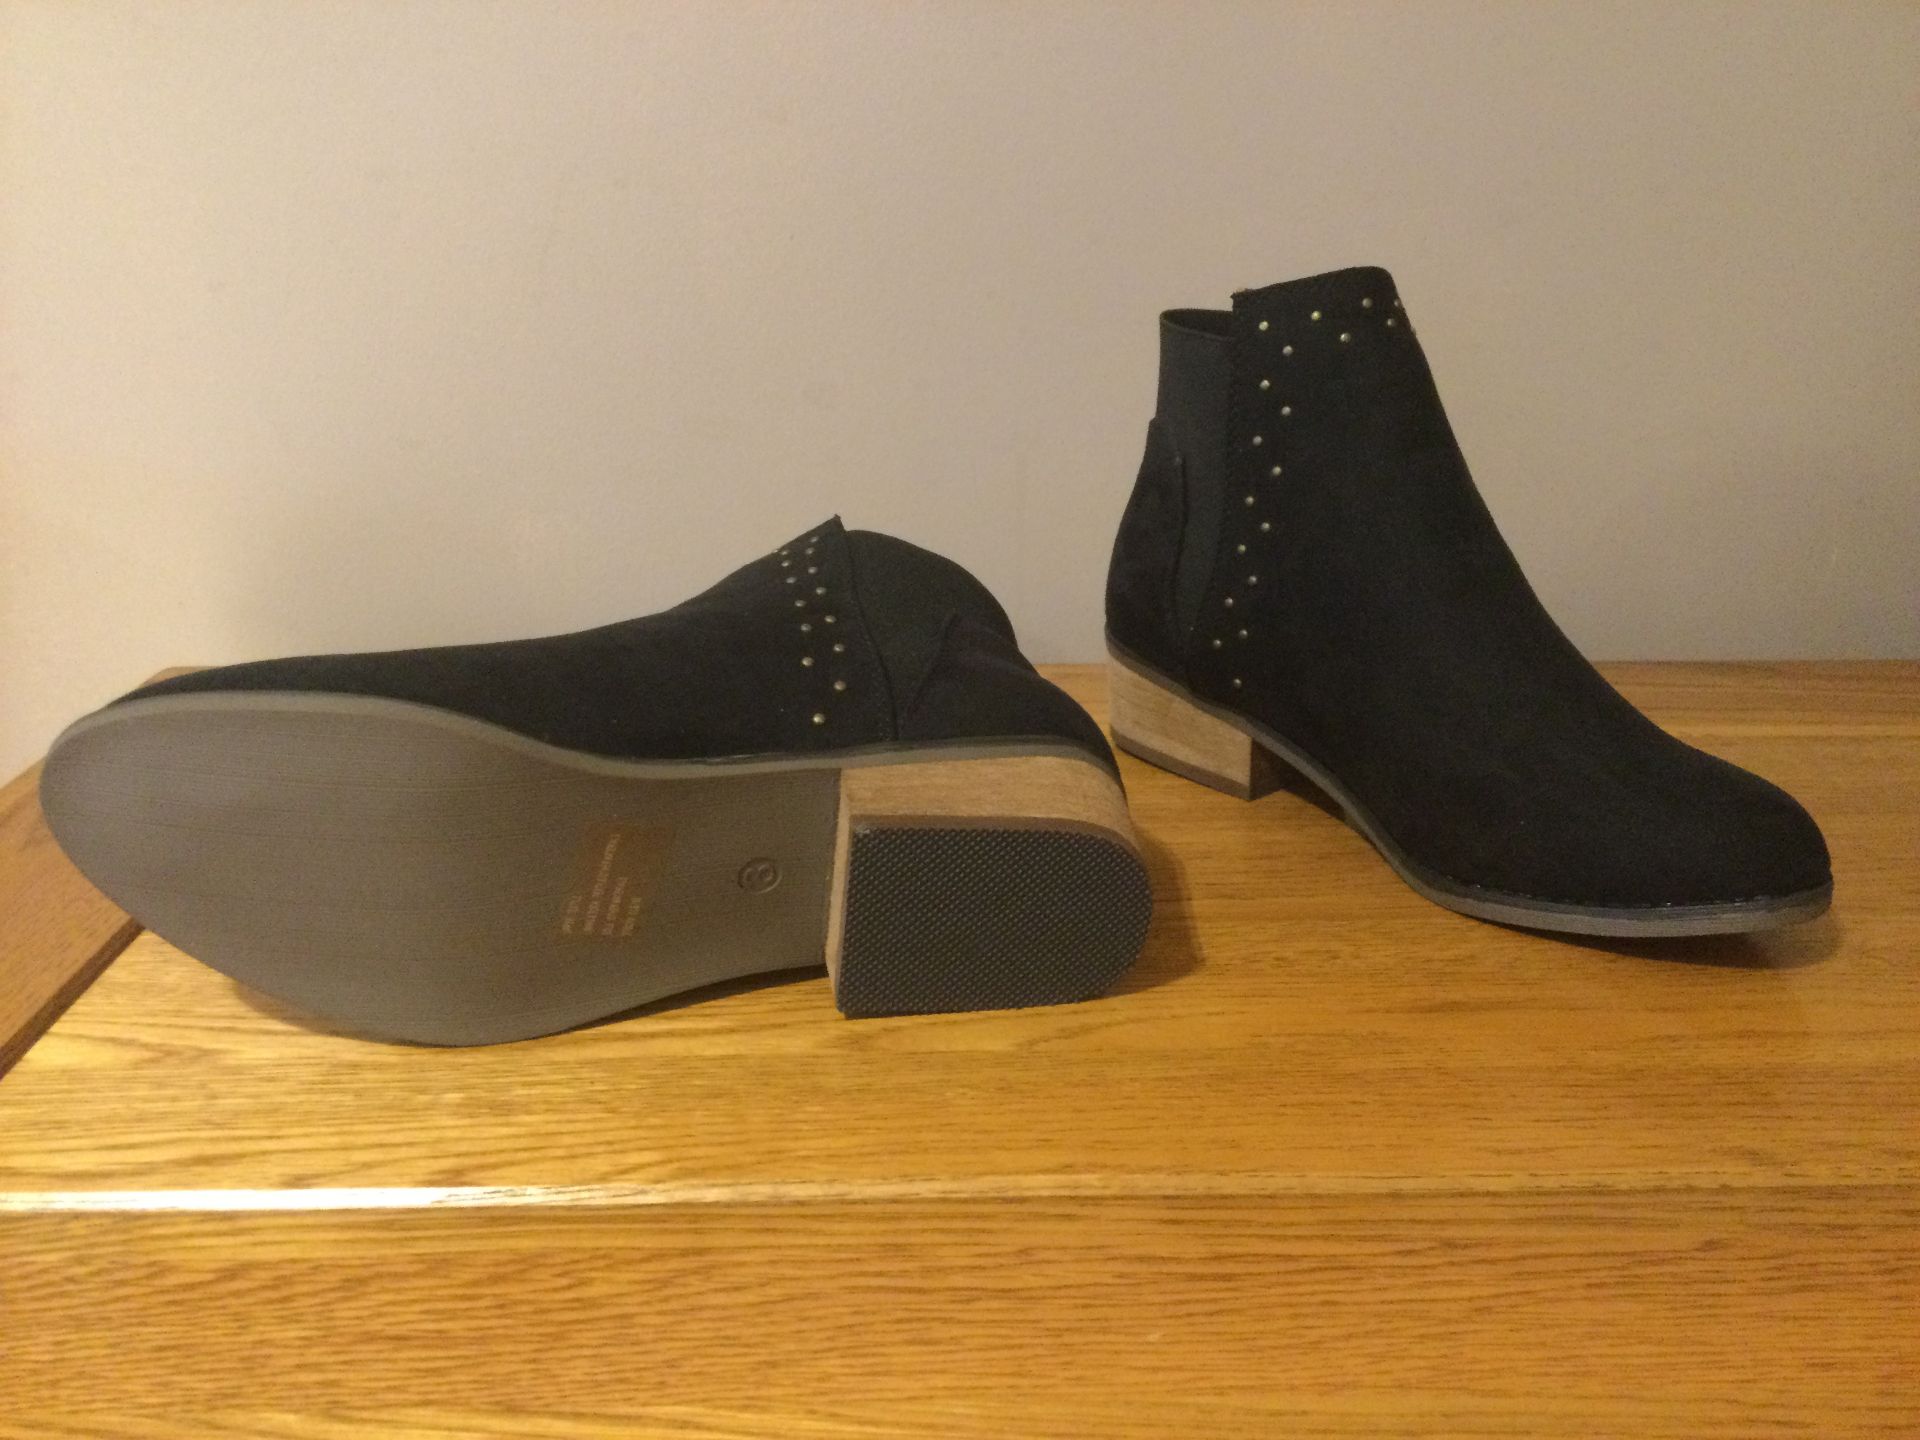 Dolcis “Wendy” Low Heel Ankle Boots, Size 5, Black - New RRP £45.99 - Image 5 of 7